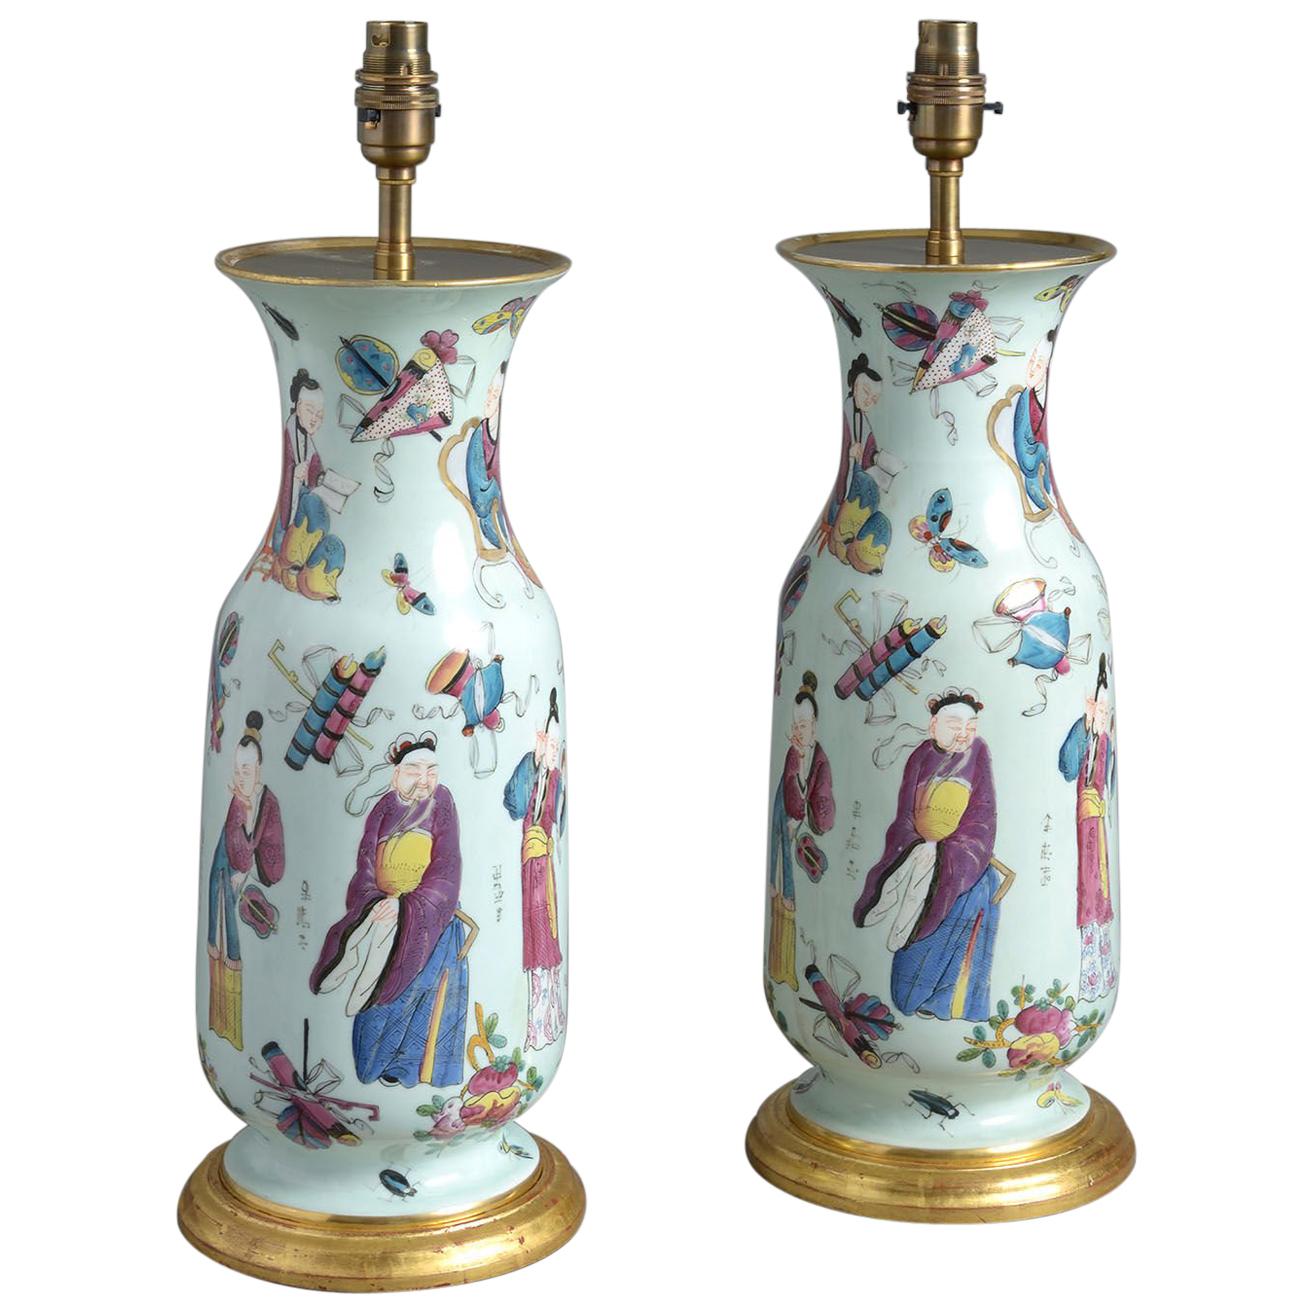 Pair of Mid-19th Century Chinoiserie Bayeux Porcelain Vases as Lamps